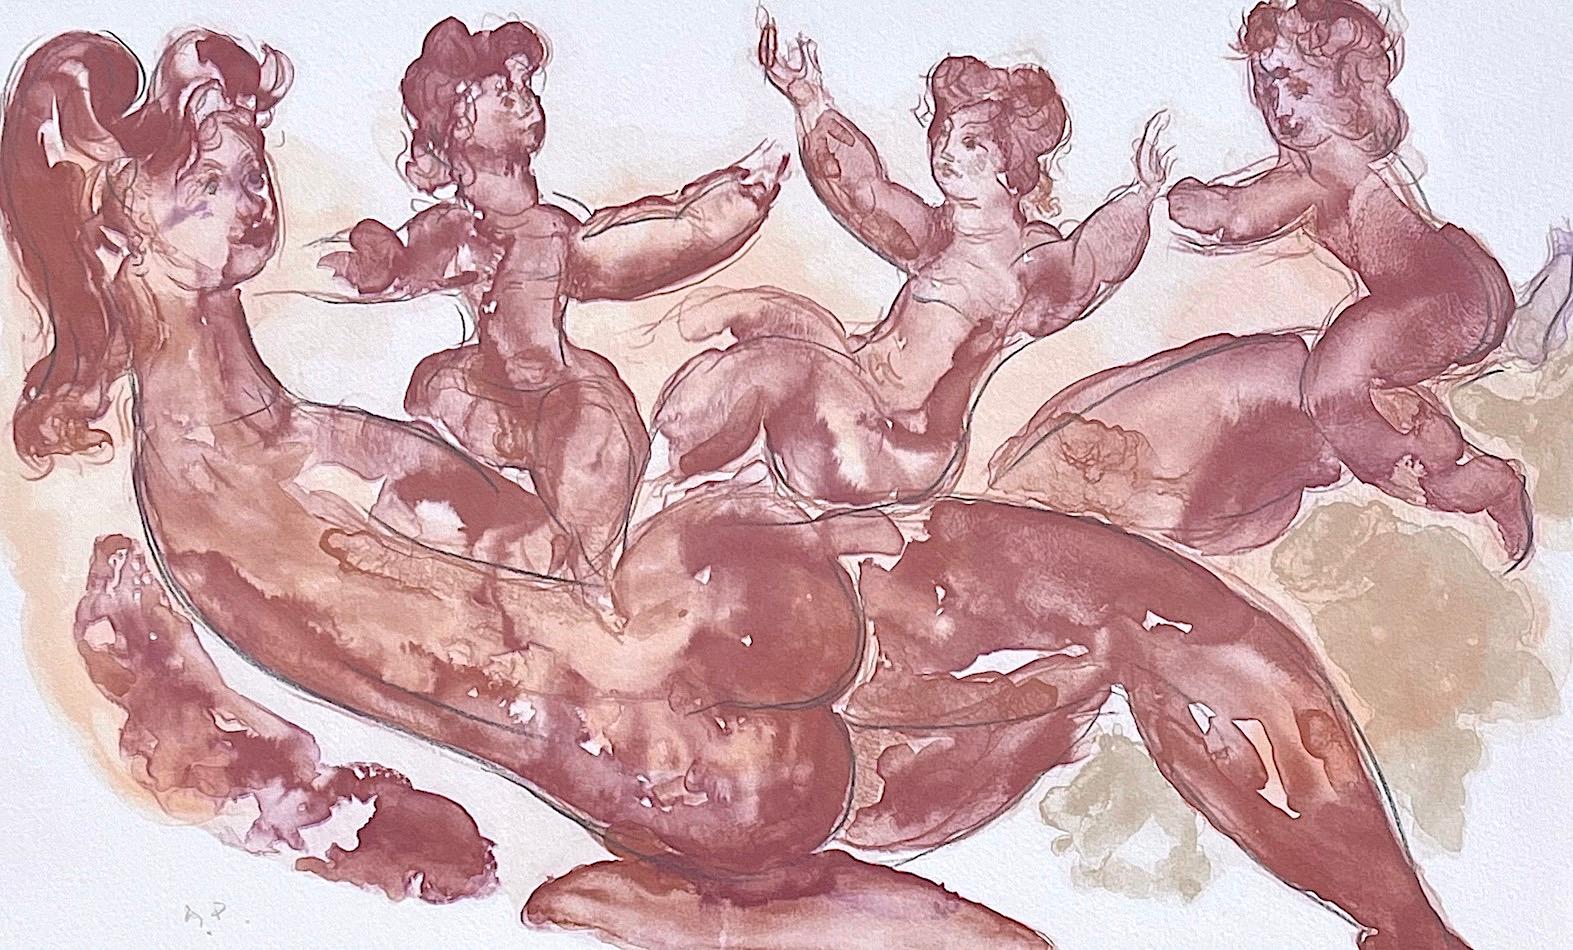 Signierte Lithographie „MOTHER AND CHILDREN PLAYING“, Mutter mit Tochter, Aquarell – Print von Chaim Gross